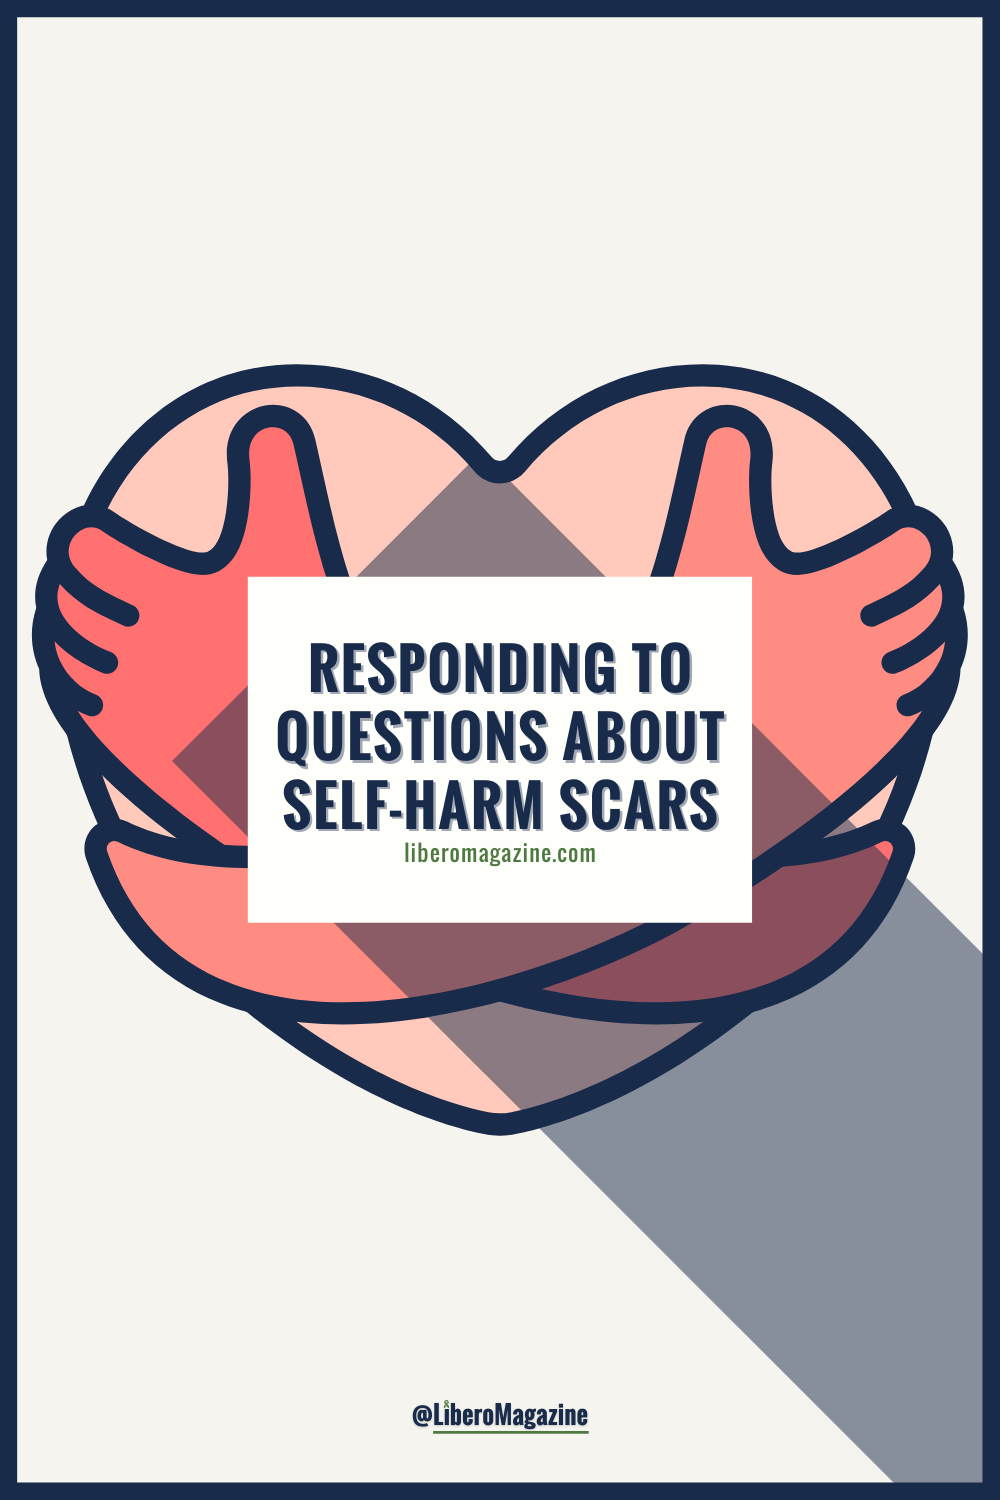 questions about self-harm scars pinterest image with arms around heart